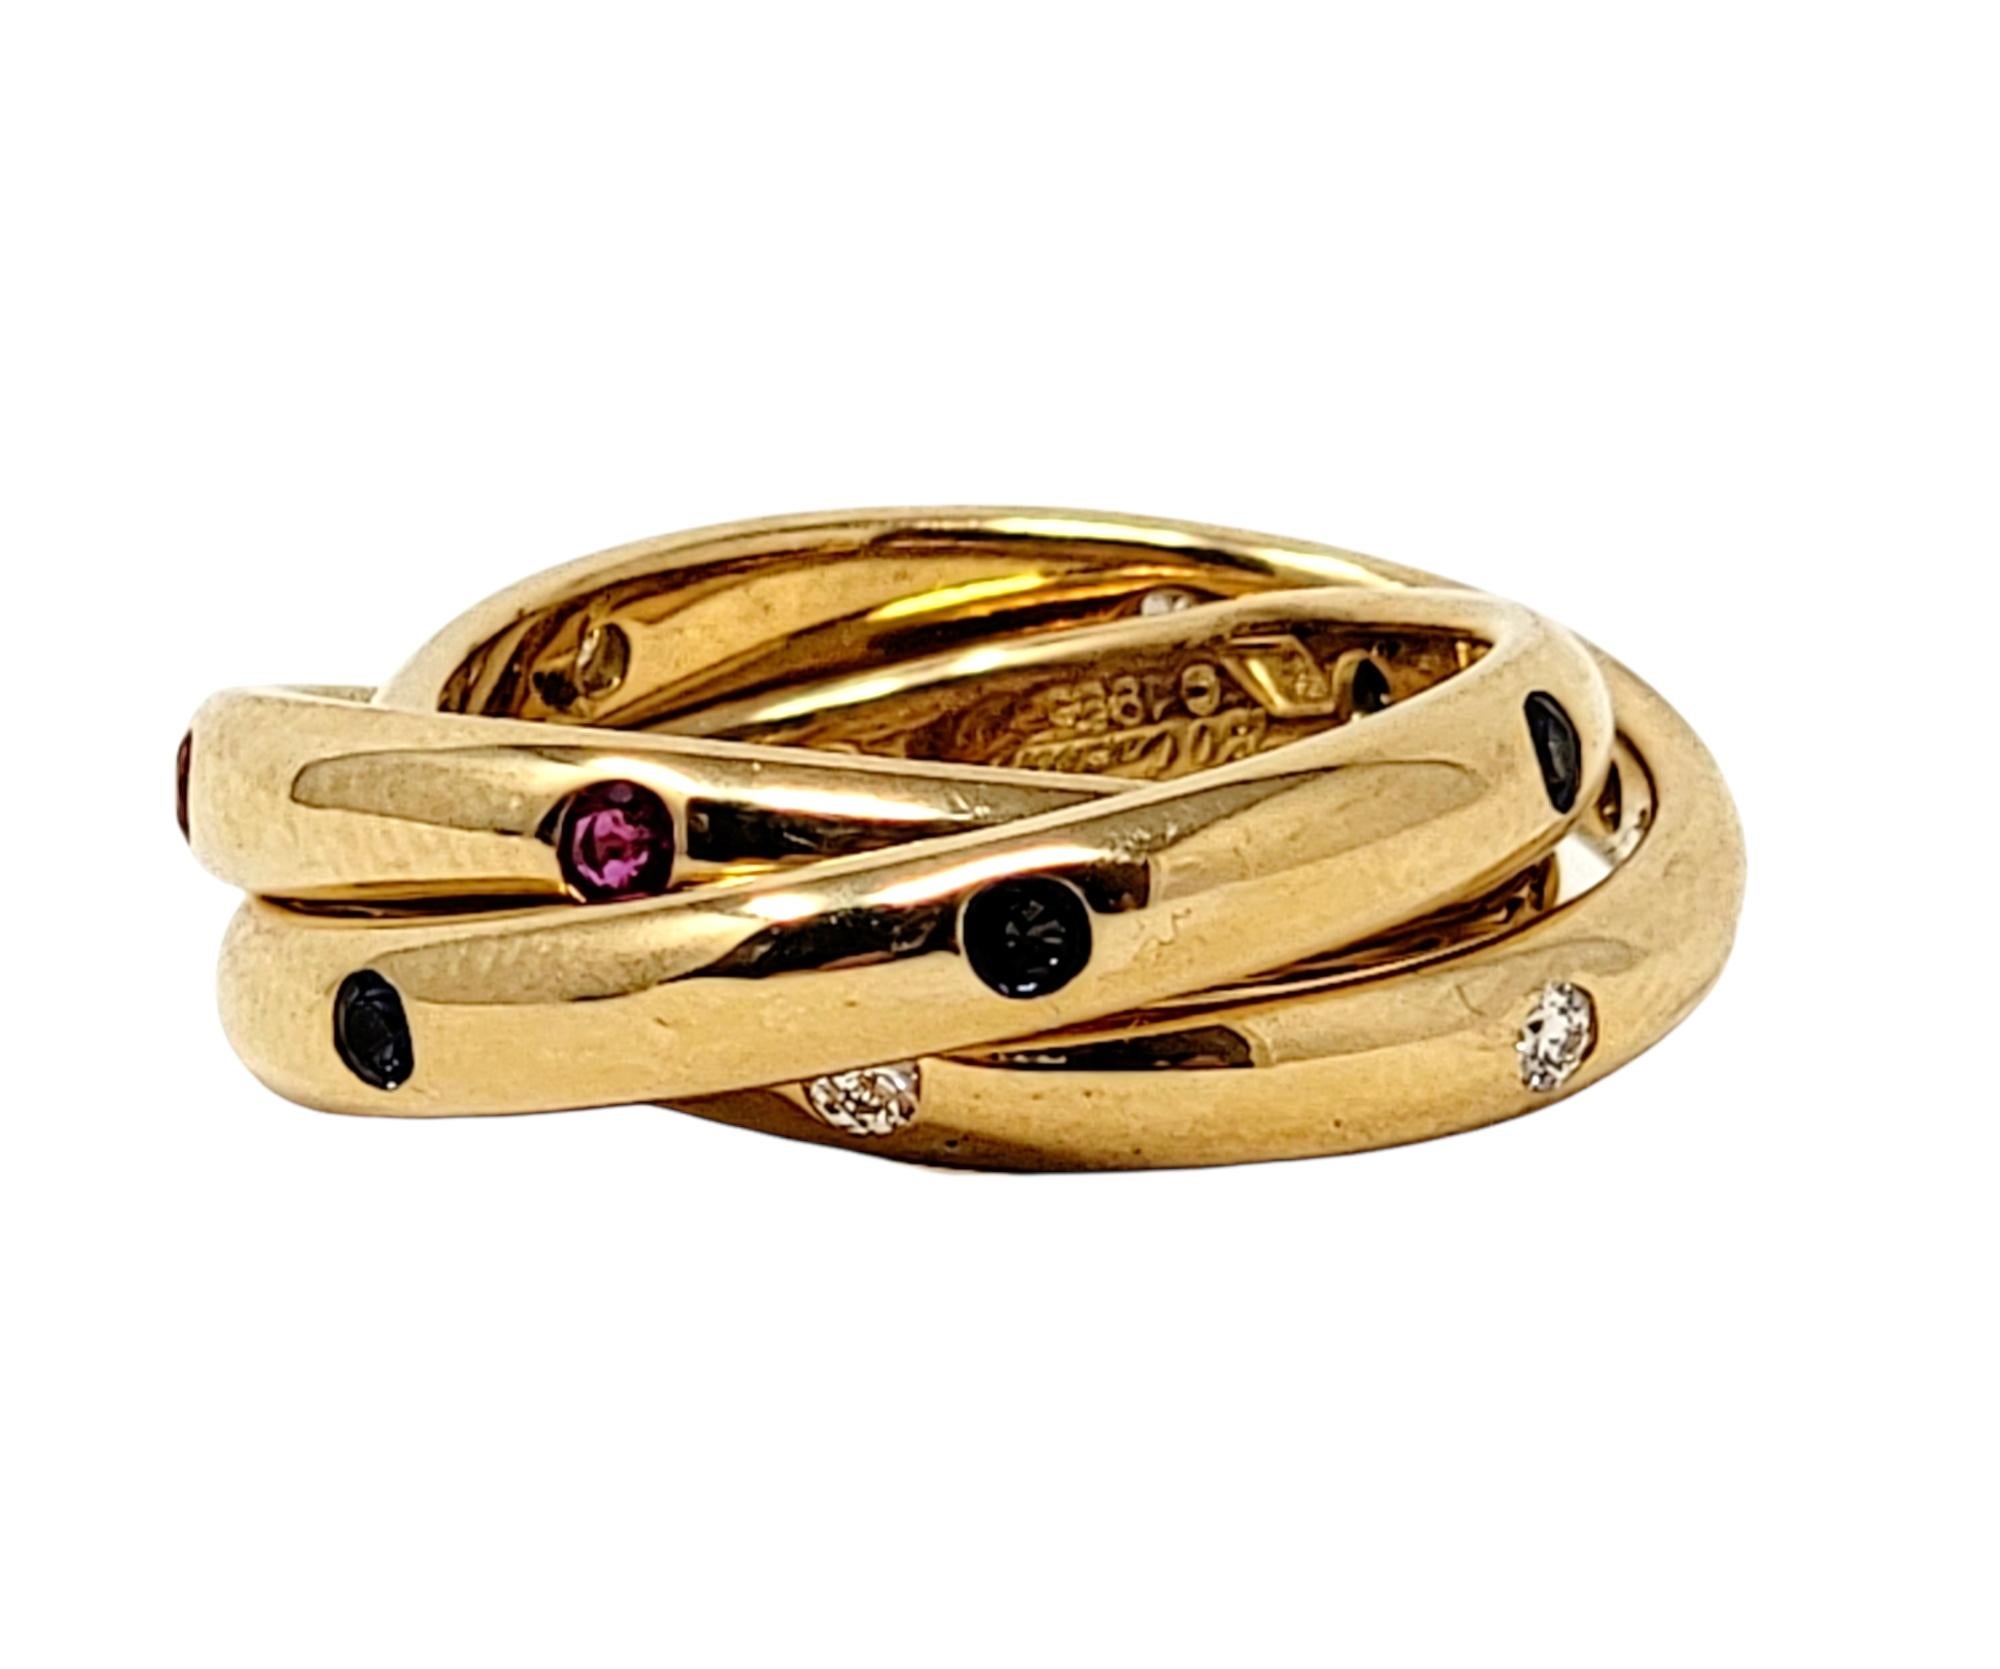 Ring size: 4.5

Stunning Cartier Trinity multi band ring with diamonds, rubies and sapphires. The three interlaced yellow gold  bands symbolize love, fidelity and friendship. Though there are 3 individual bands, the trio is attached and meant to be